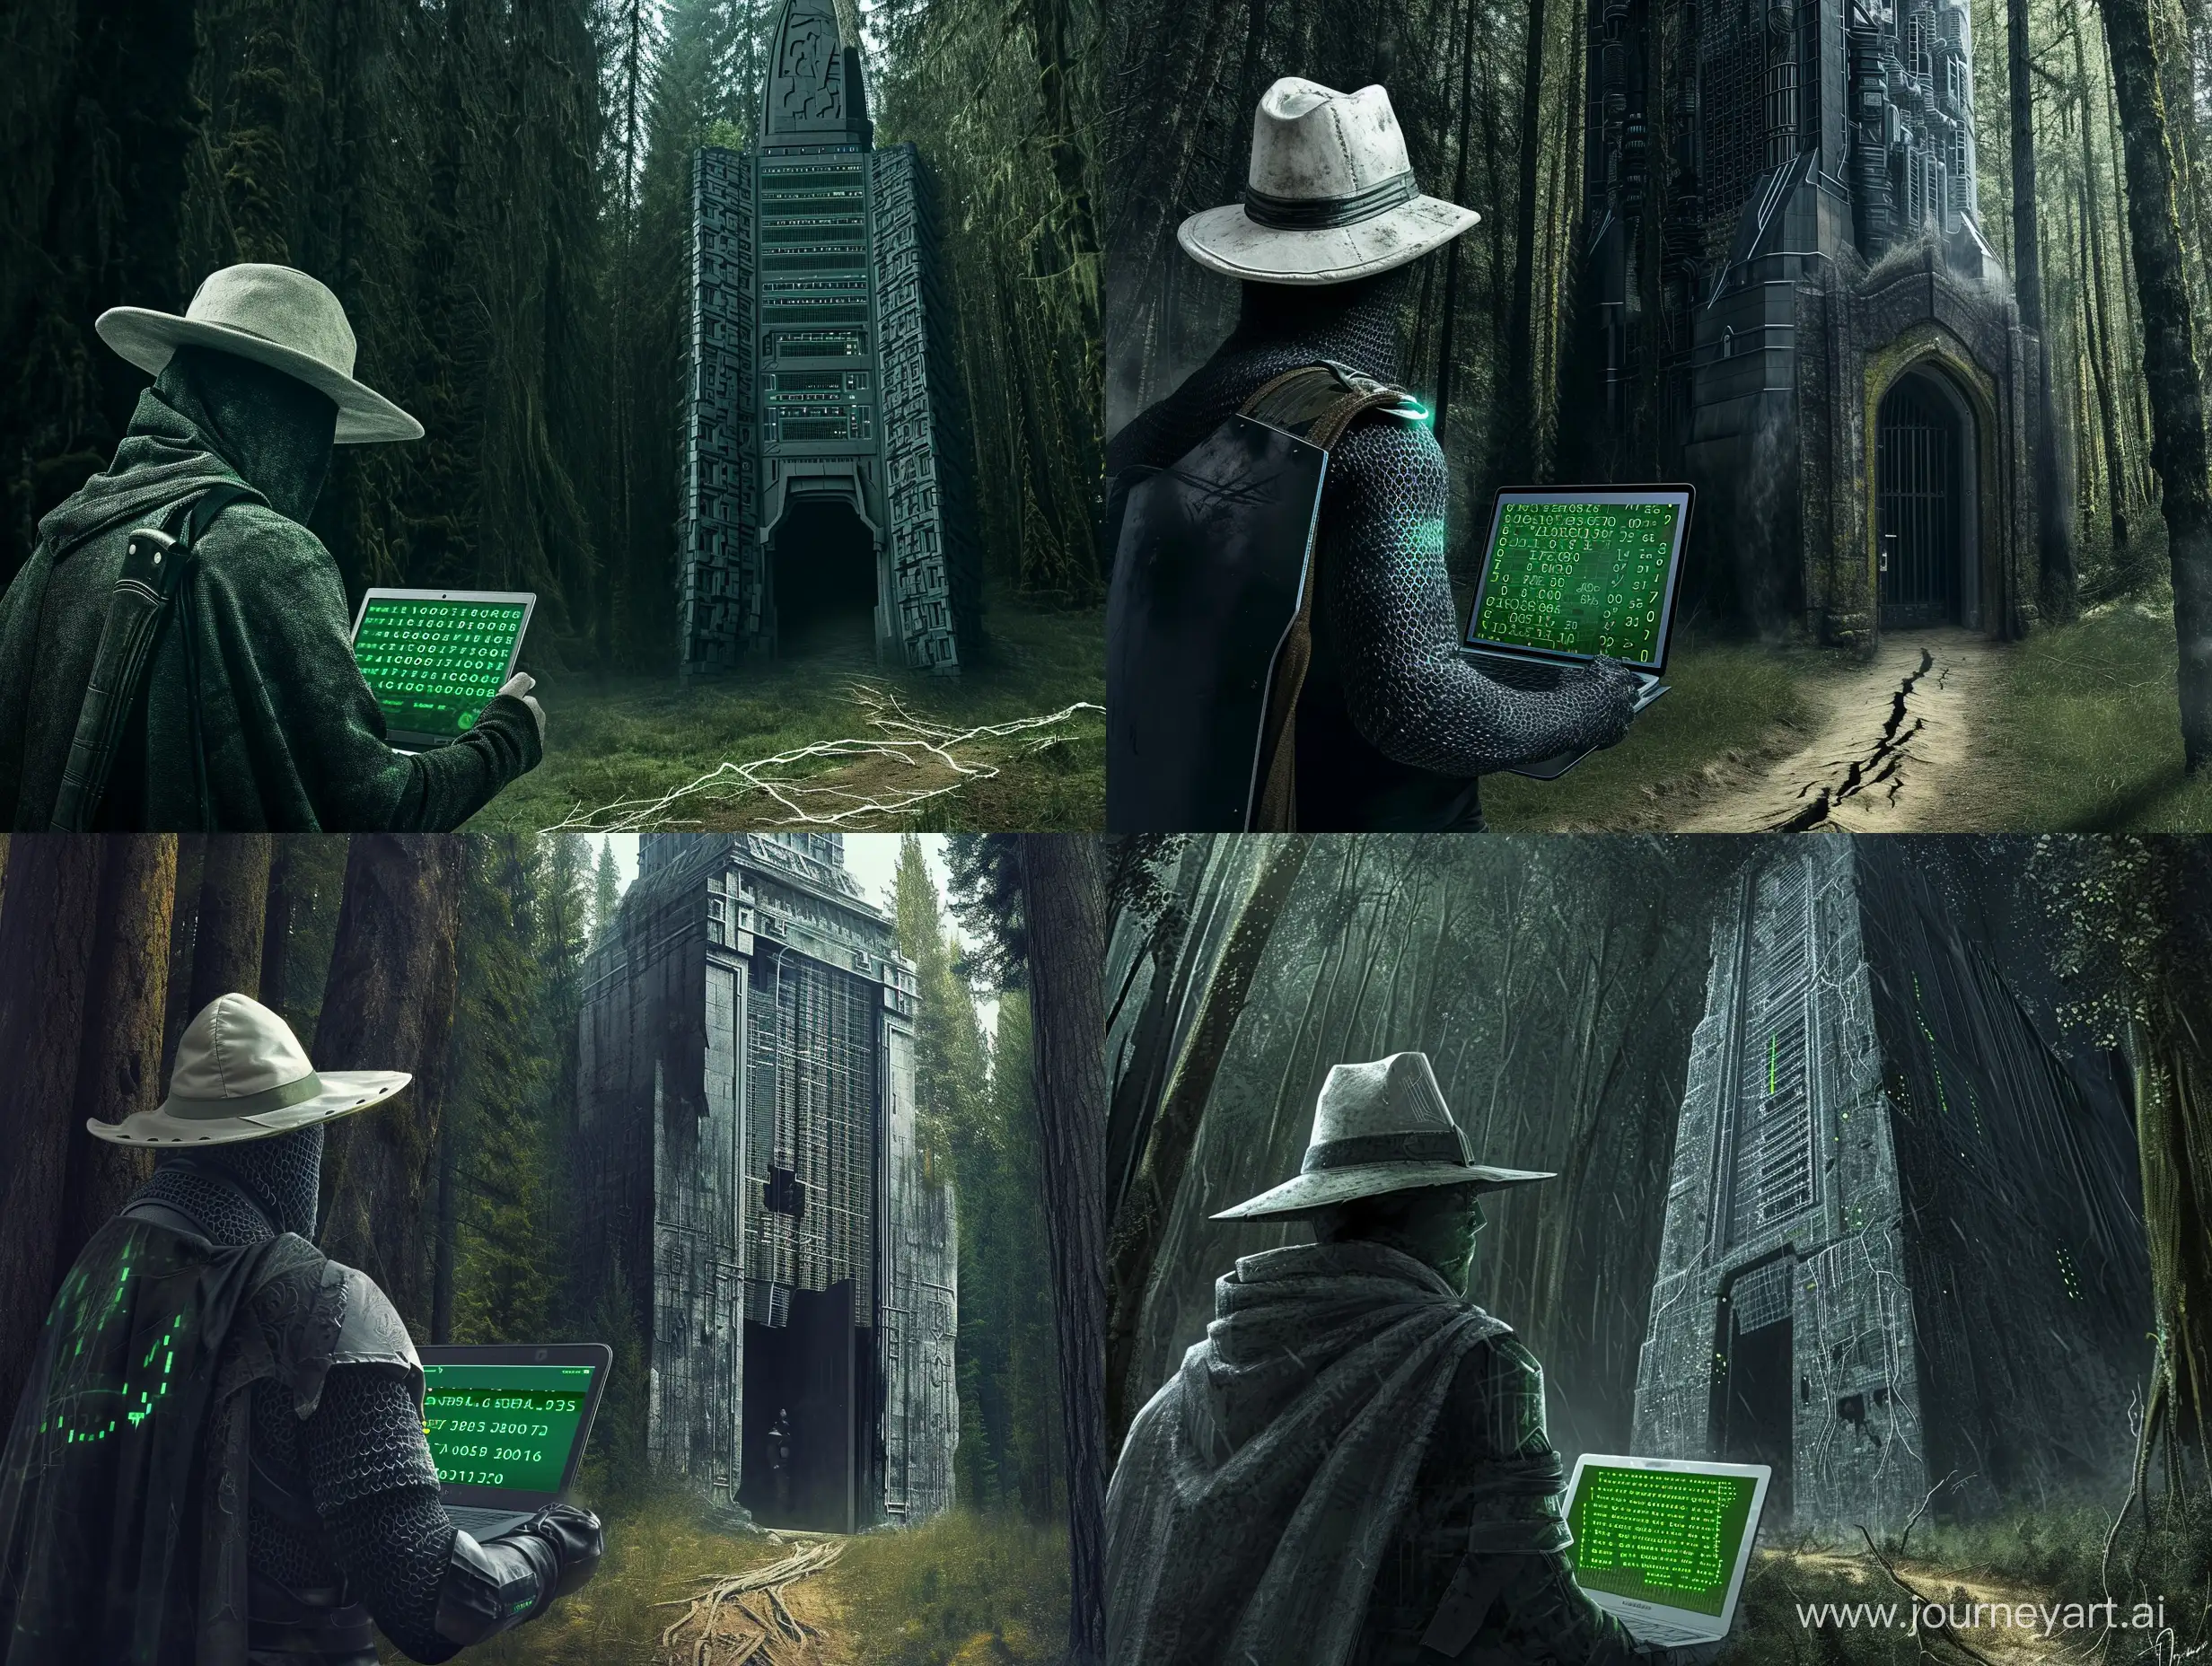 a dark medieval knight wearing a off-white colored fedora, facing a large towering gloomy ominous datacenter entrance, holding a laptop with green binary on its screen. low angle, low exposure. behind the night is only forest from which a raggedy trail emerges